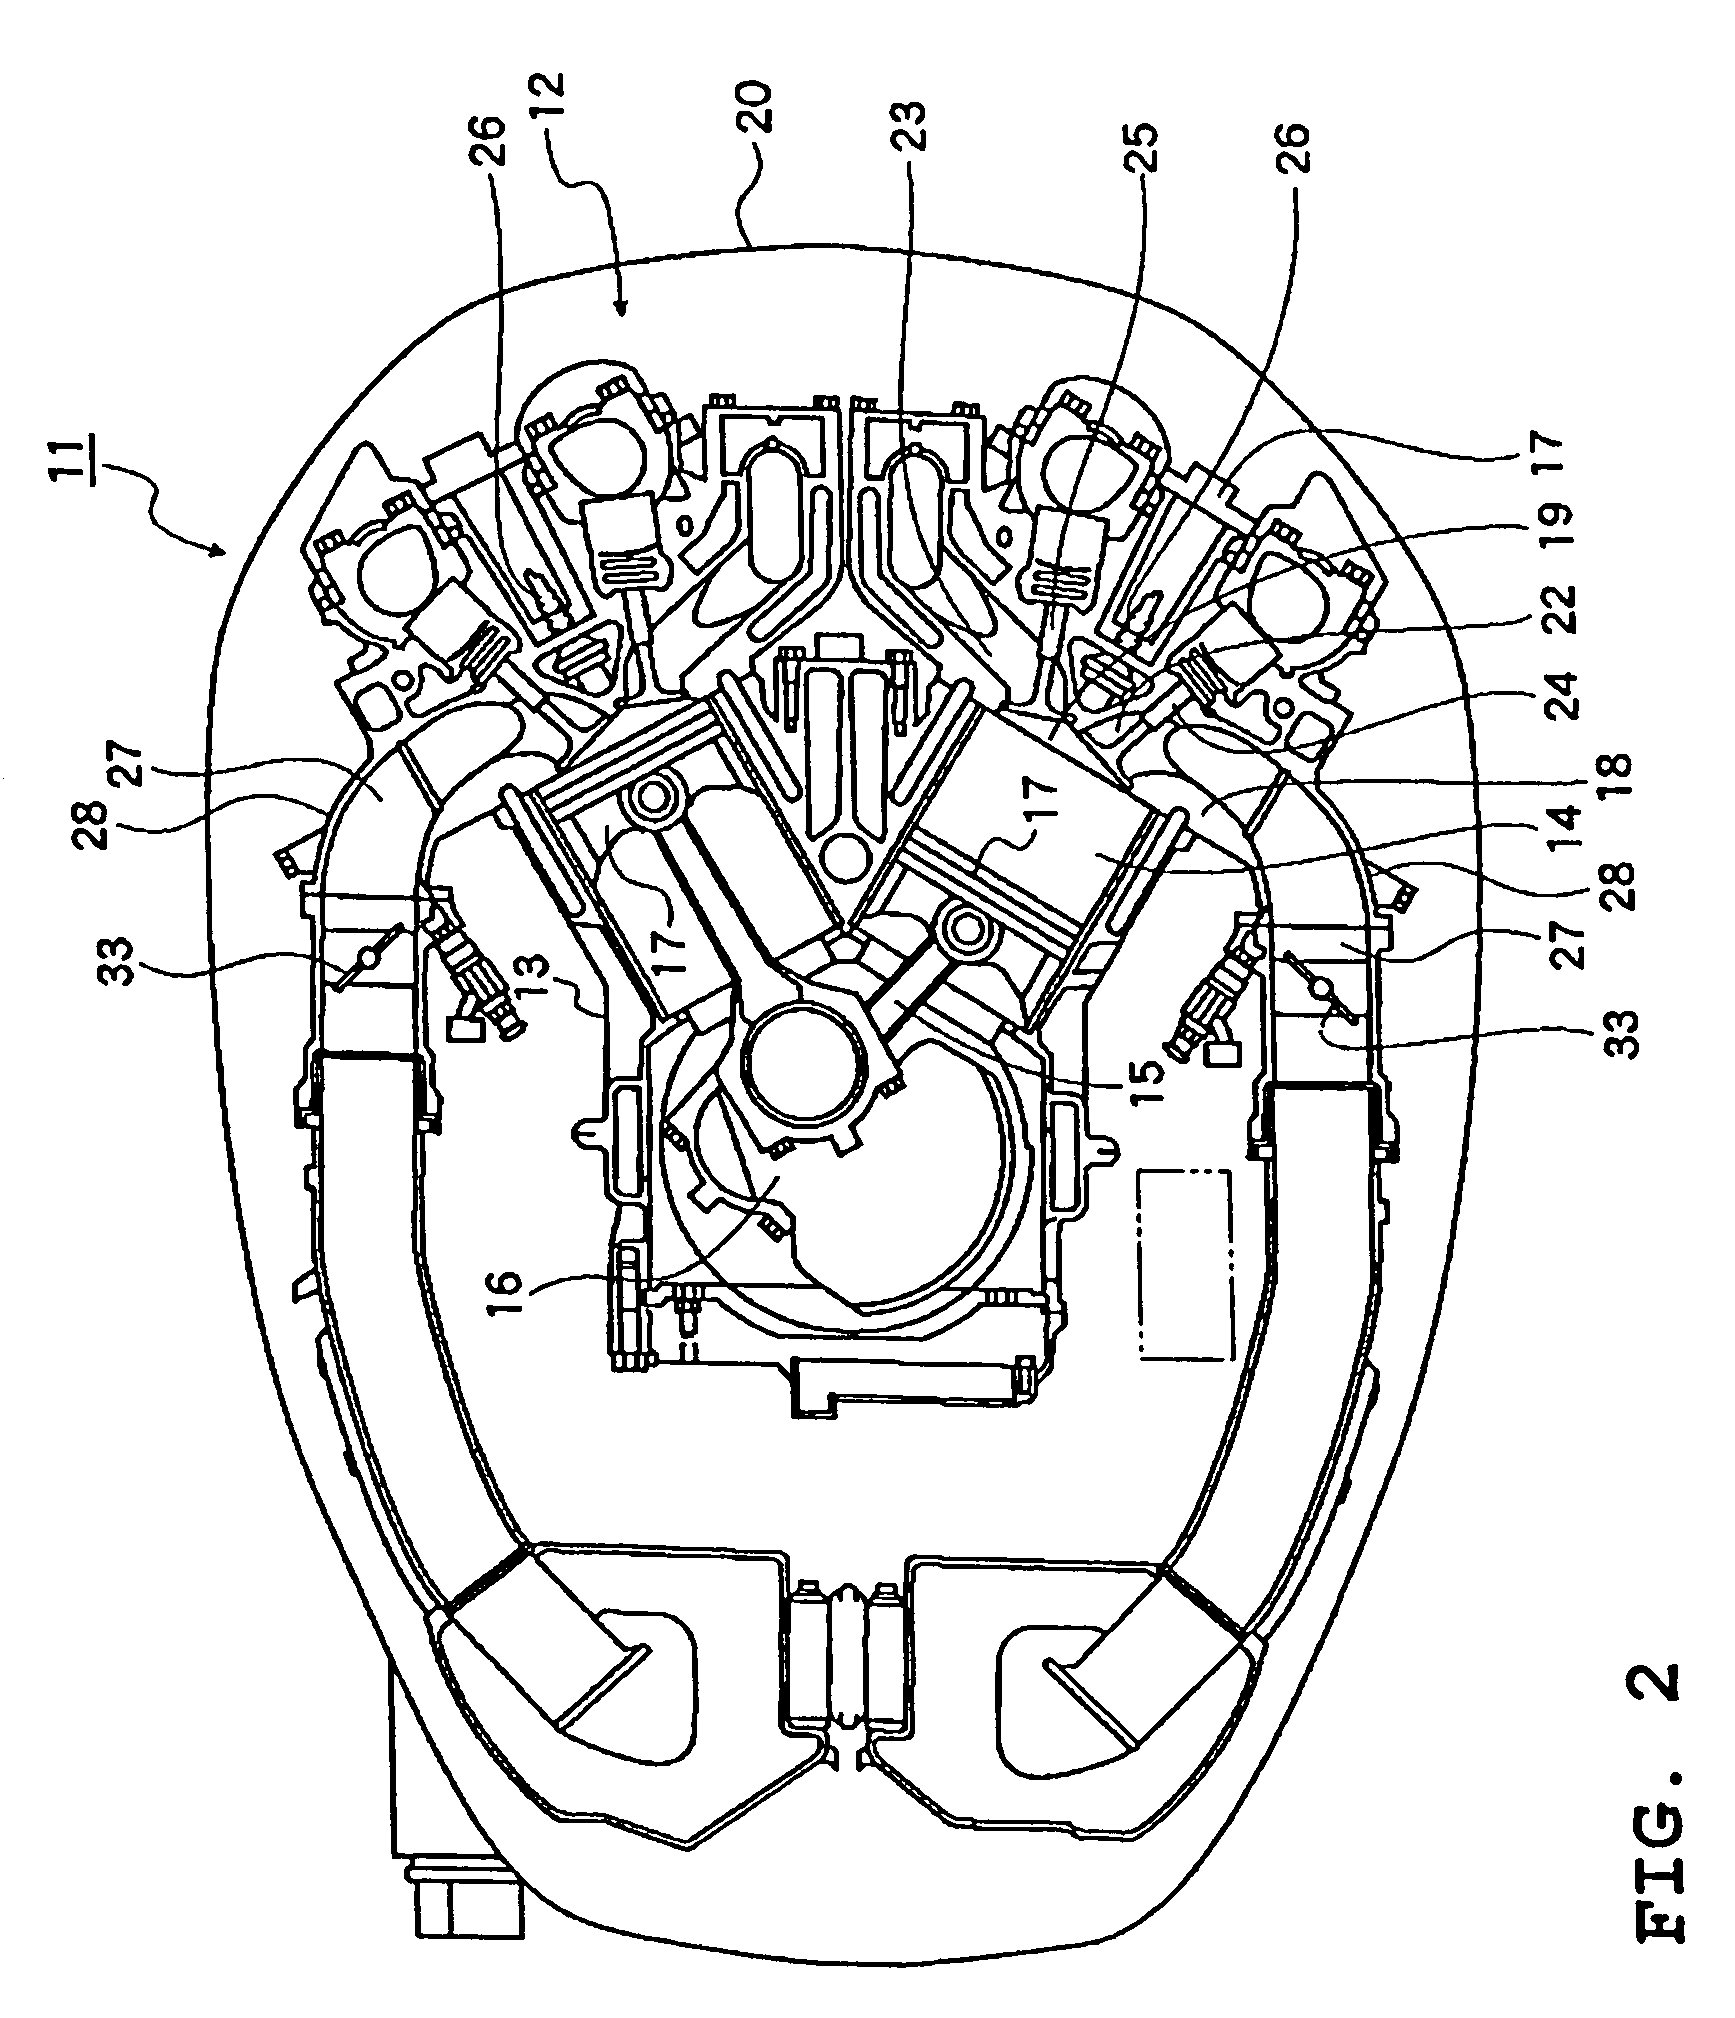 Throttle valve opening control device for a watercraft engine